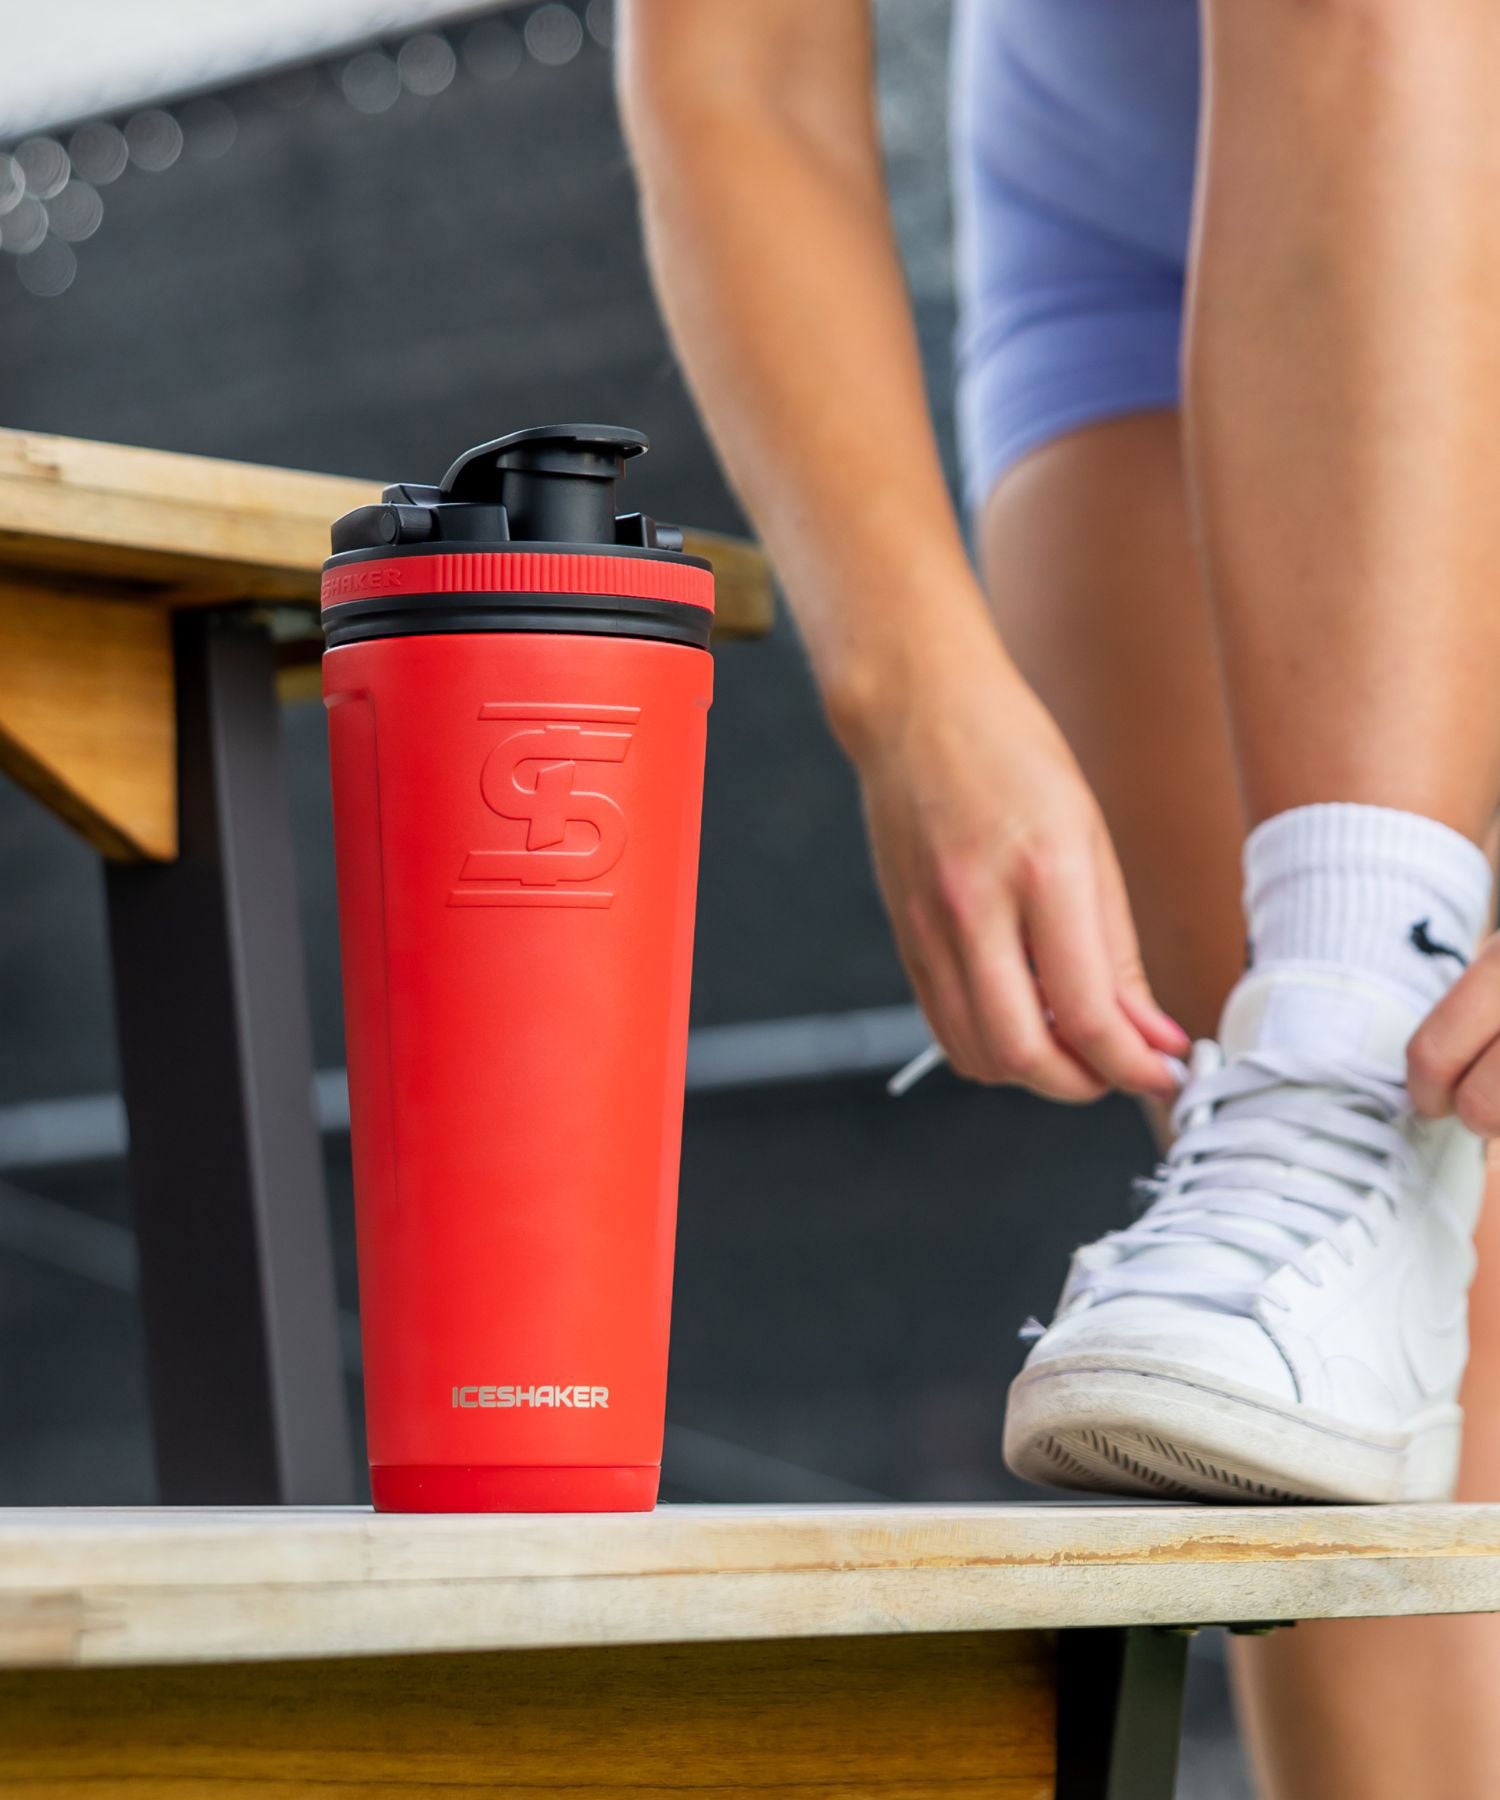 An image of a Red 26oz Ice Shaker sitting on a picnic table bench. A lady has her foot up on the bench next to the Ice Shaker and is tying her white athletic shoe. Click now to Shop 26oz. Ice Shaker Bottles